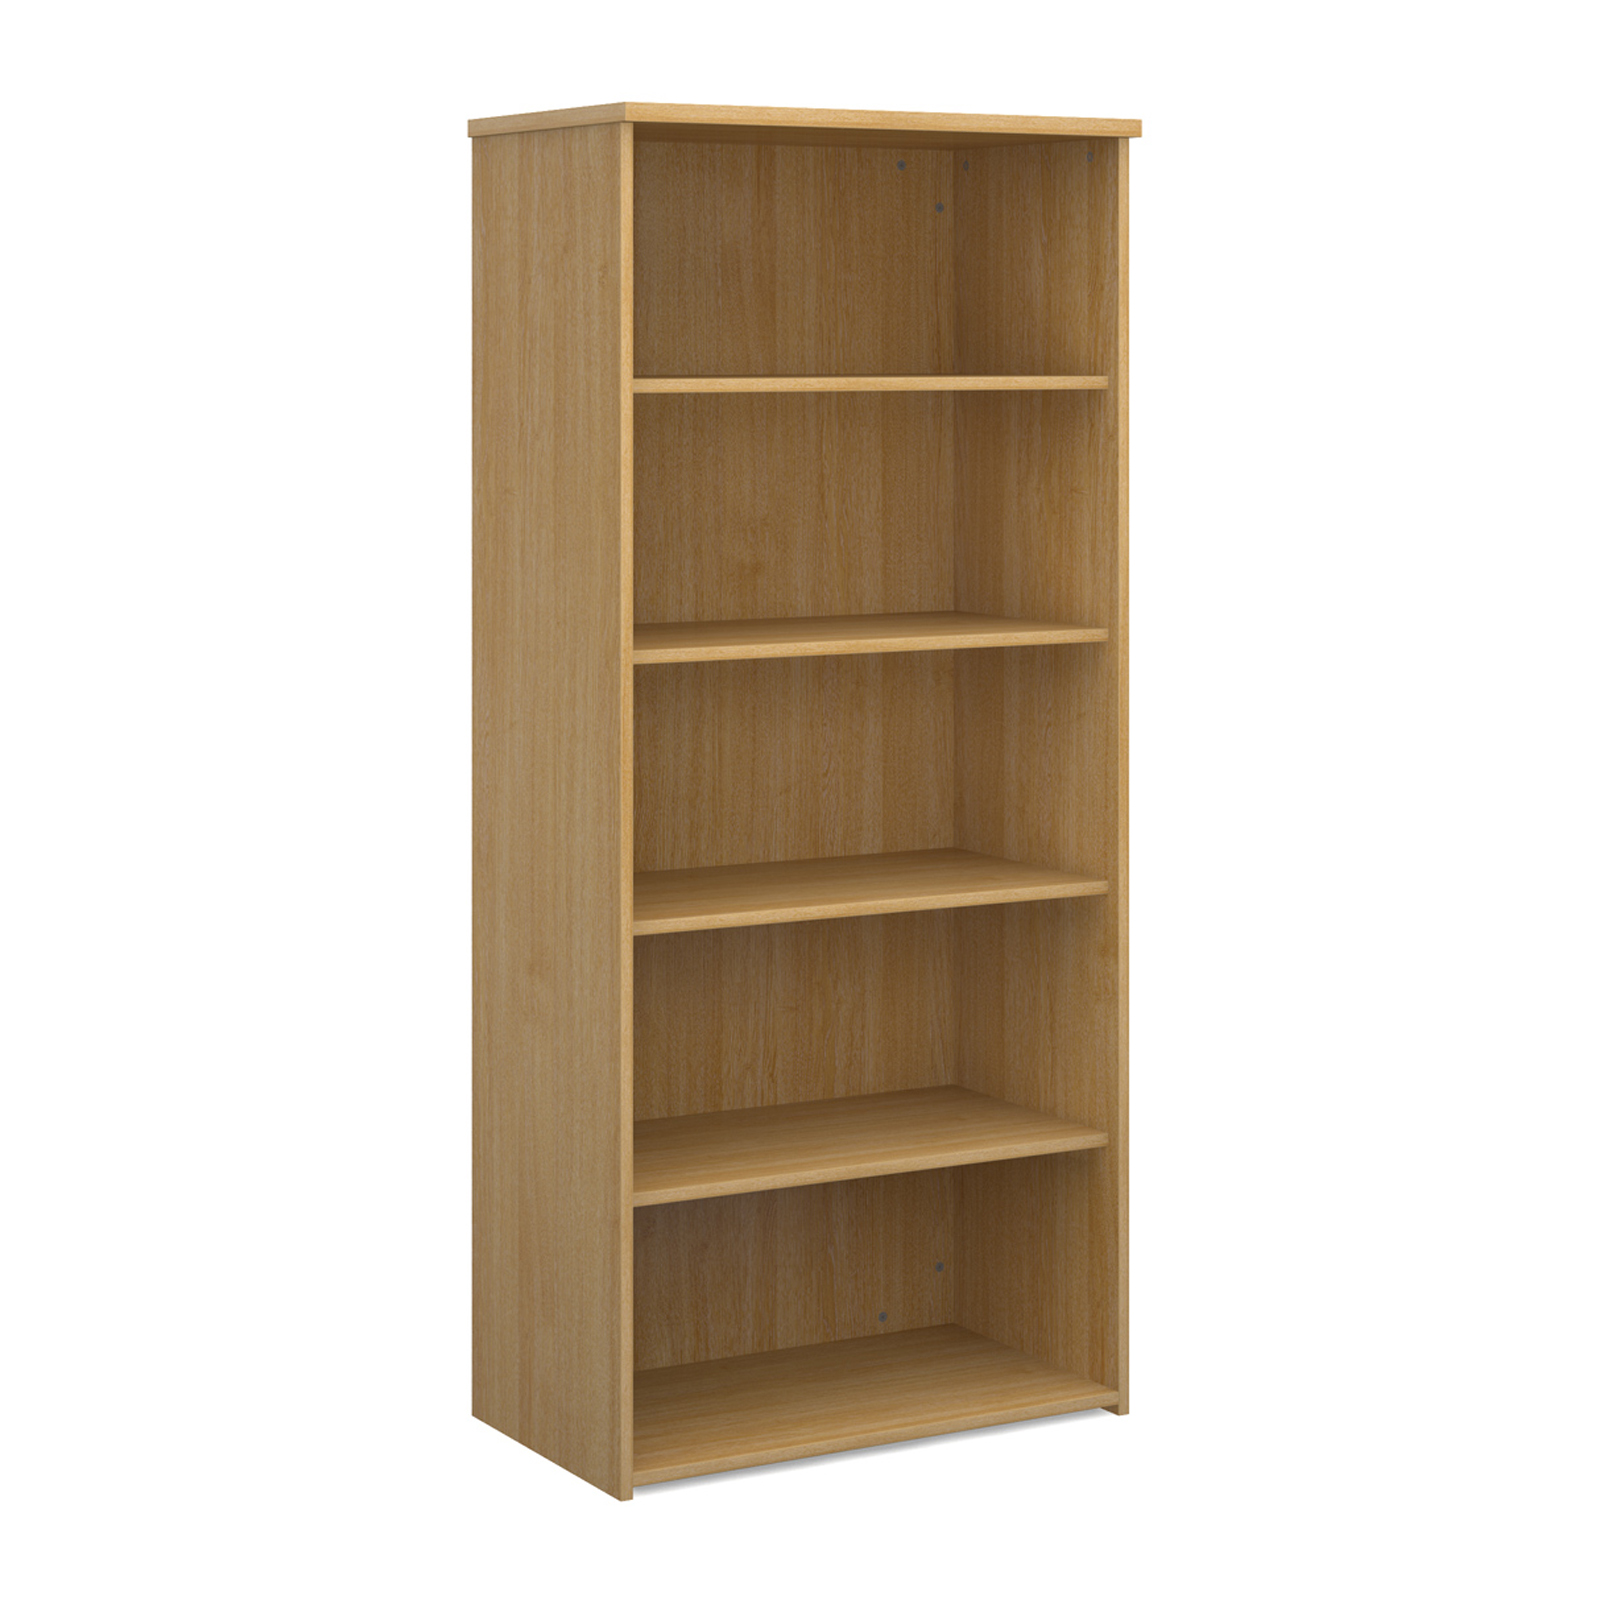 Over 1200mm High Universal bookcase 1790mm high with 4 shelves - oak